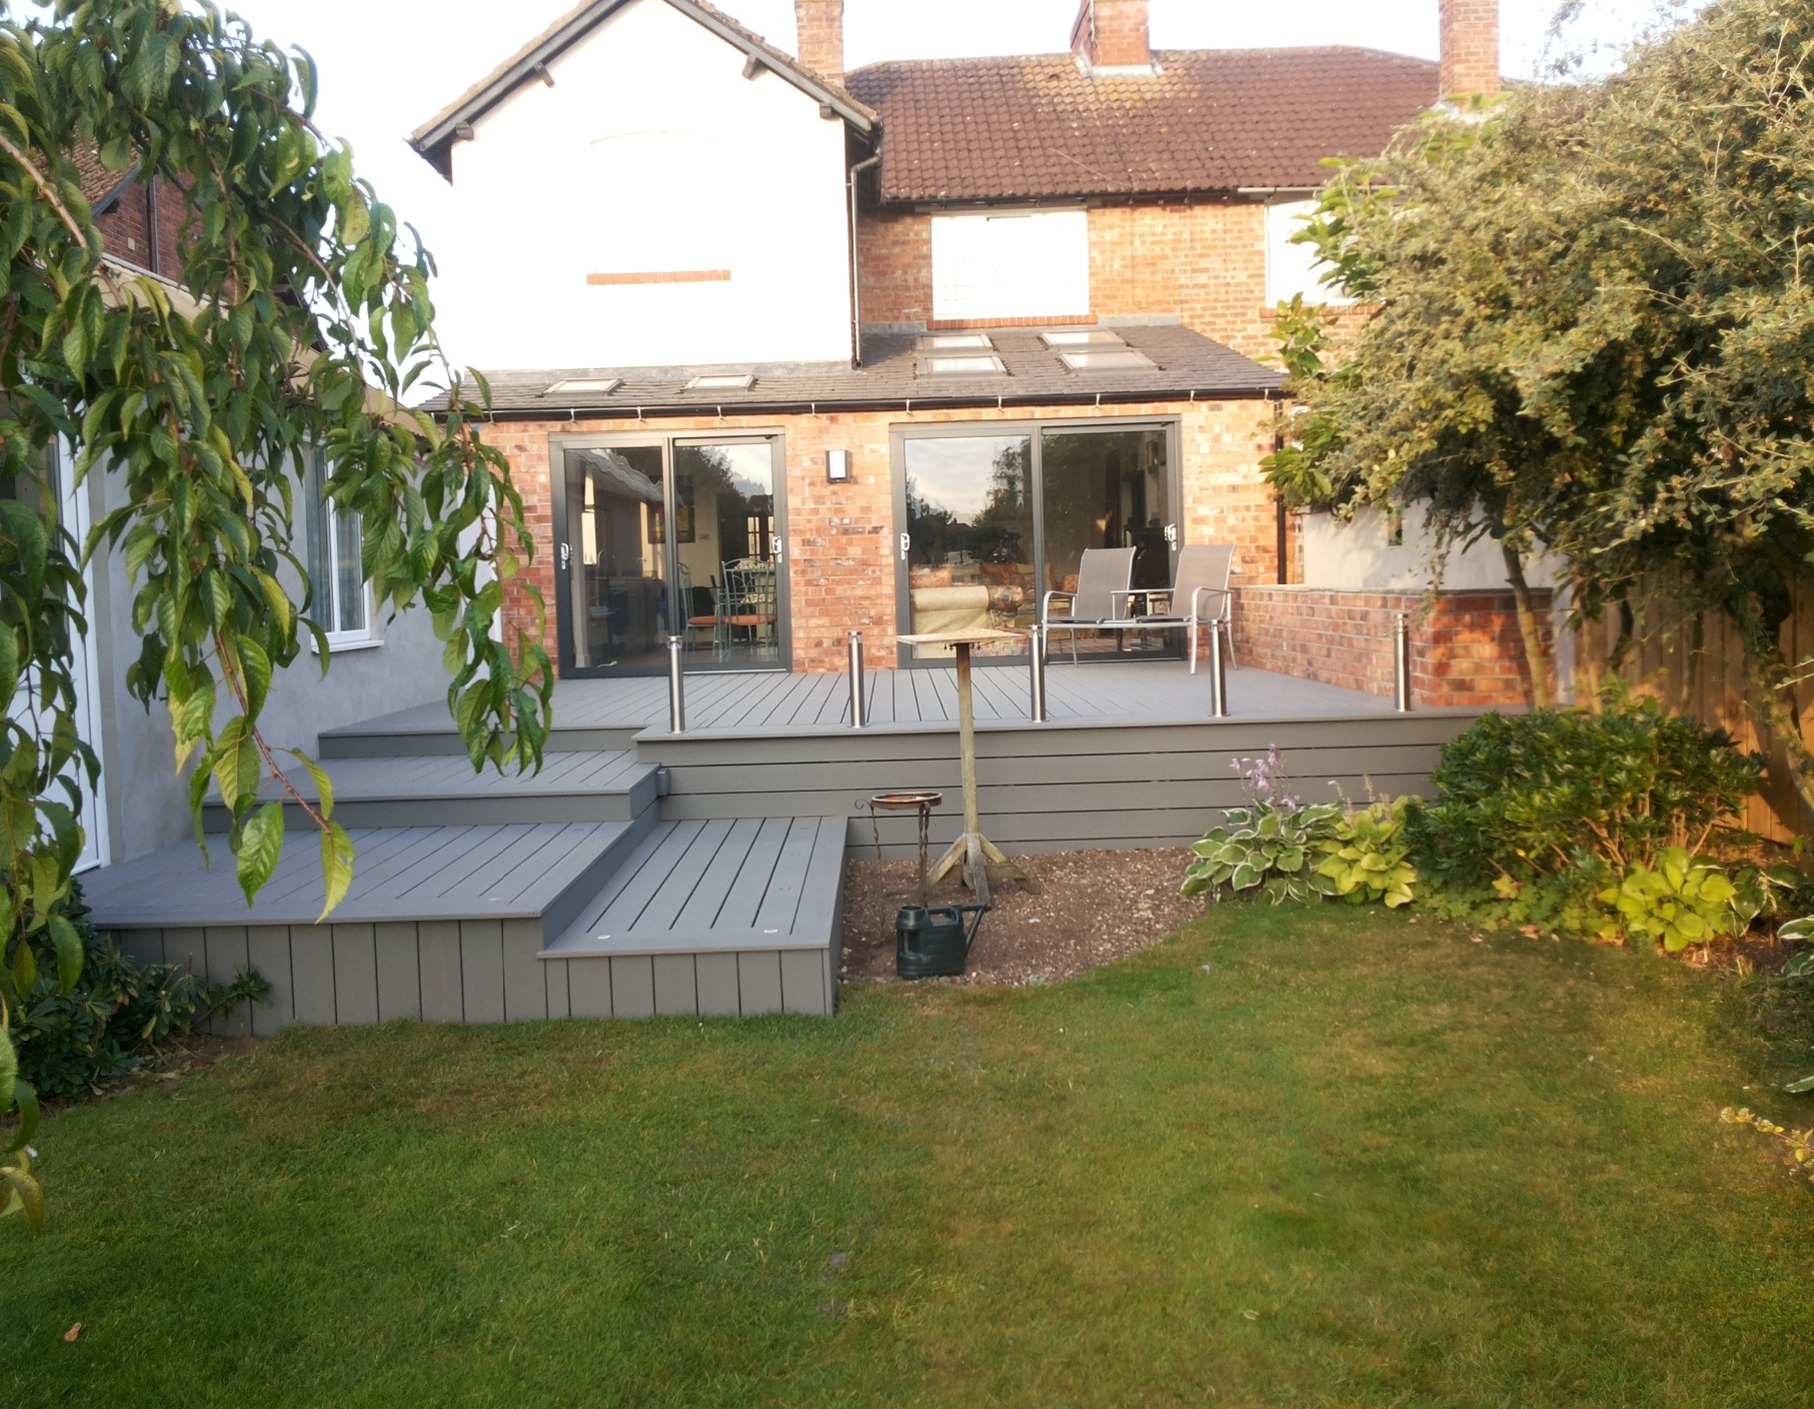 Raised composite decking with fitted lighting